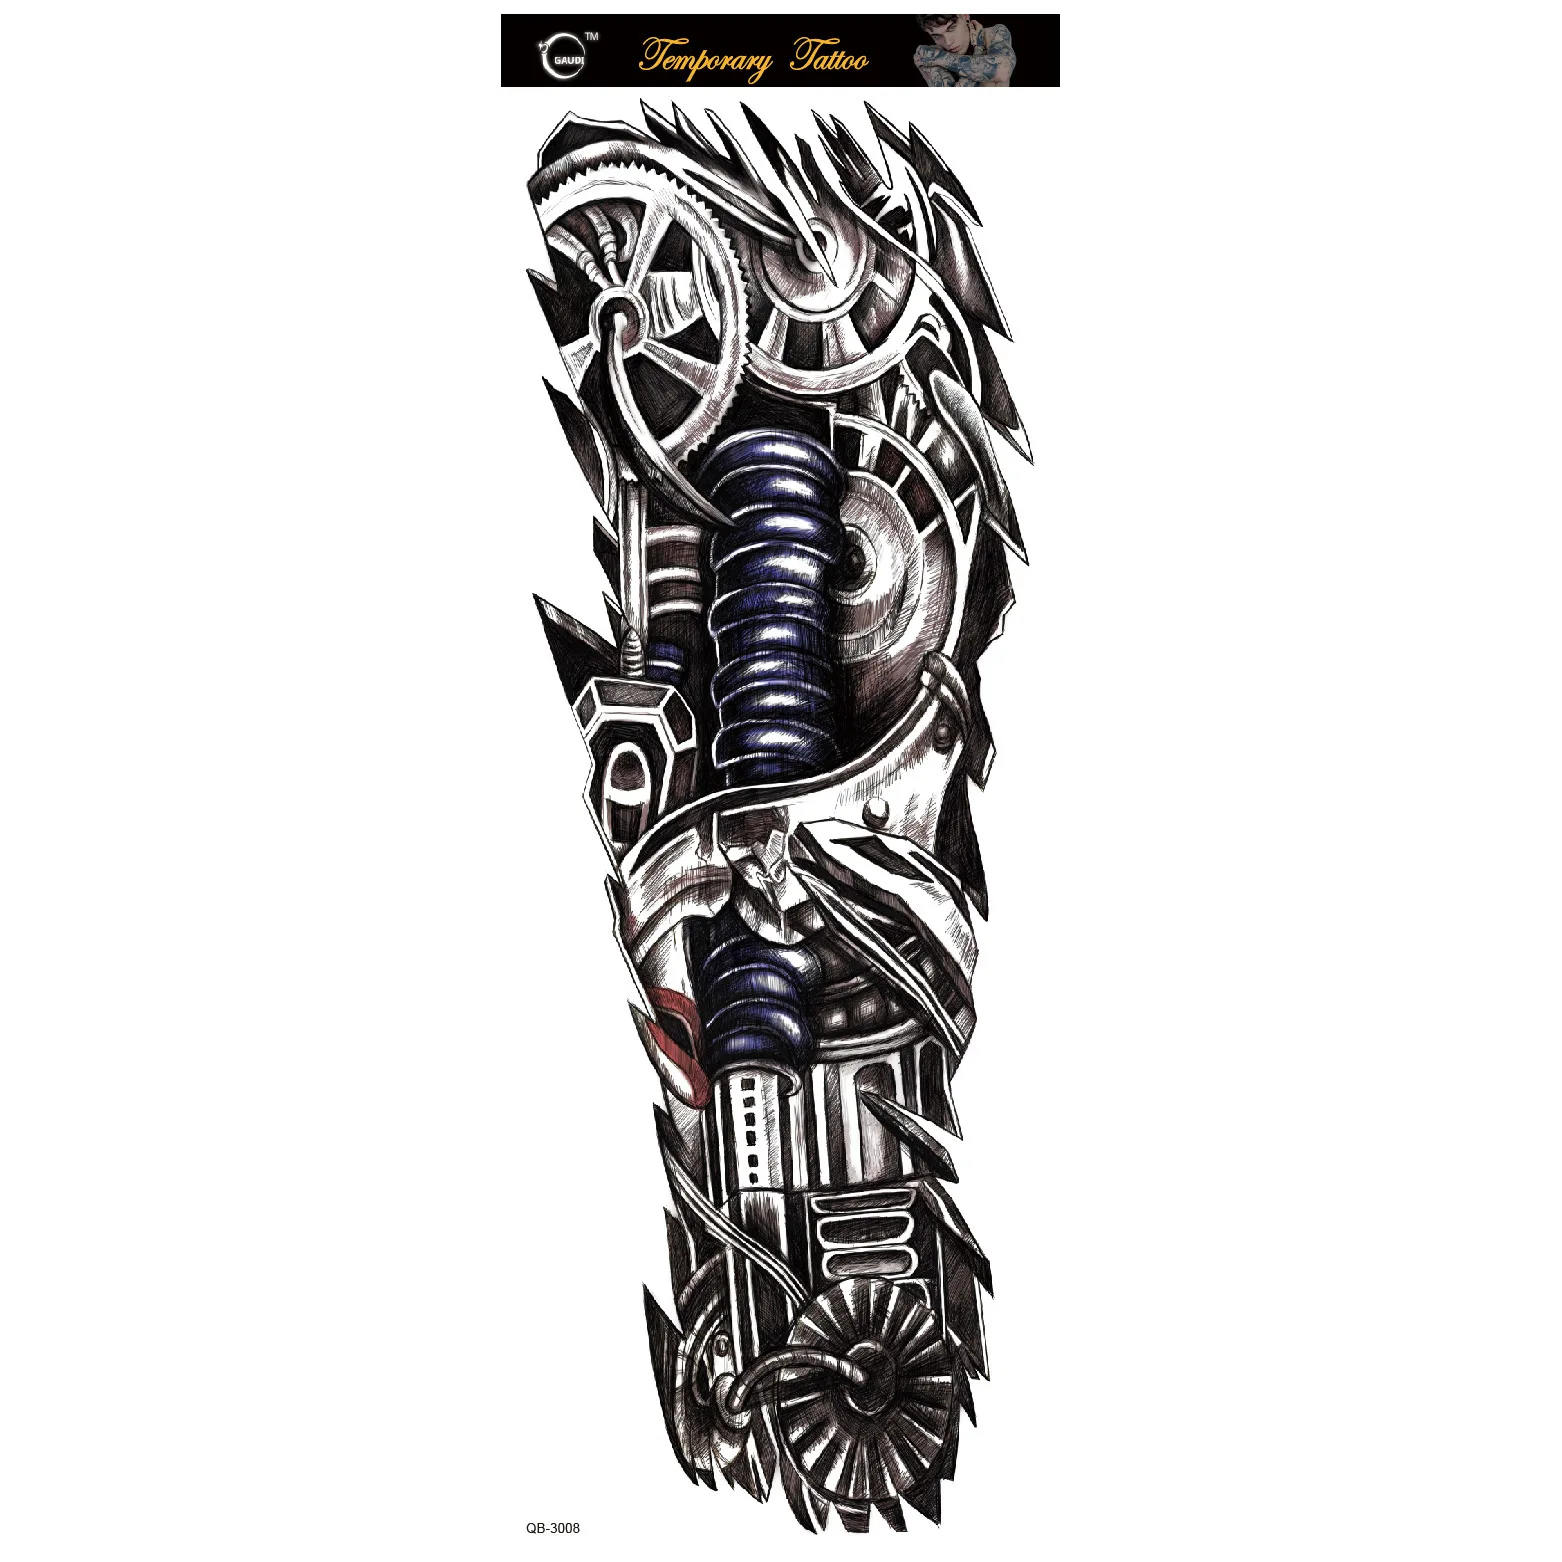 Bio Mechanical Heart Tattoo Heart Tattoos Cool Tattoos Small Biomechanical Tattoo  Designs PNG Image With Transparent Background  TOPpng